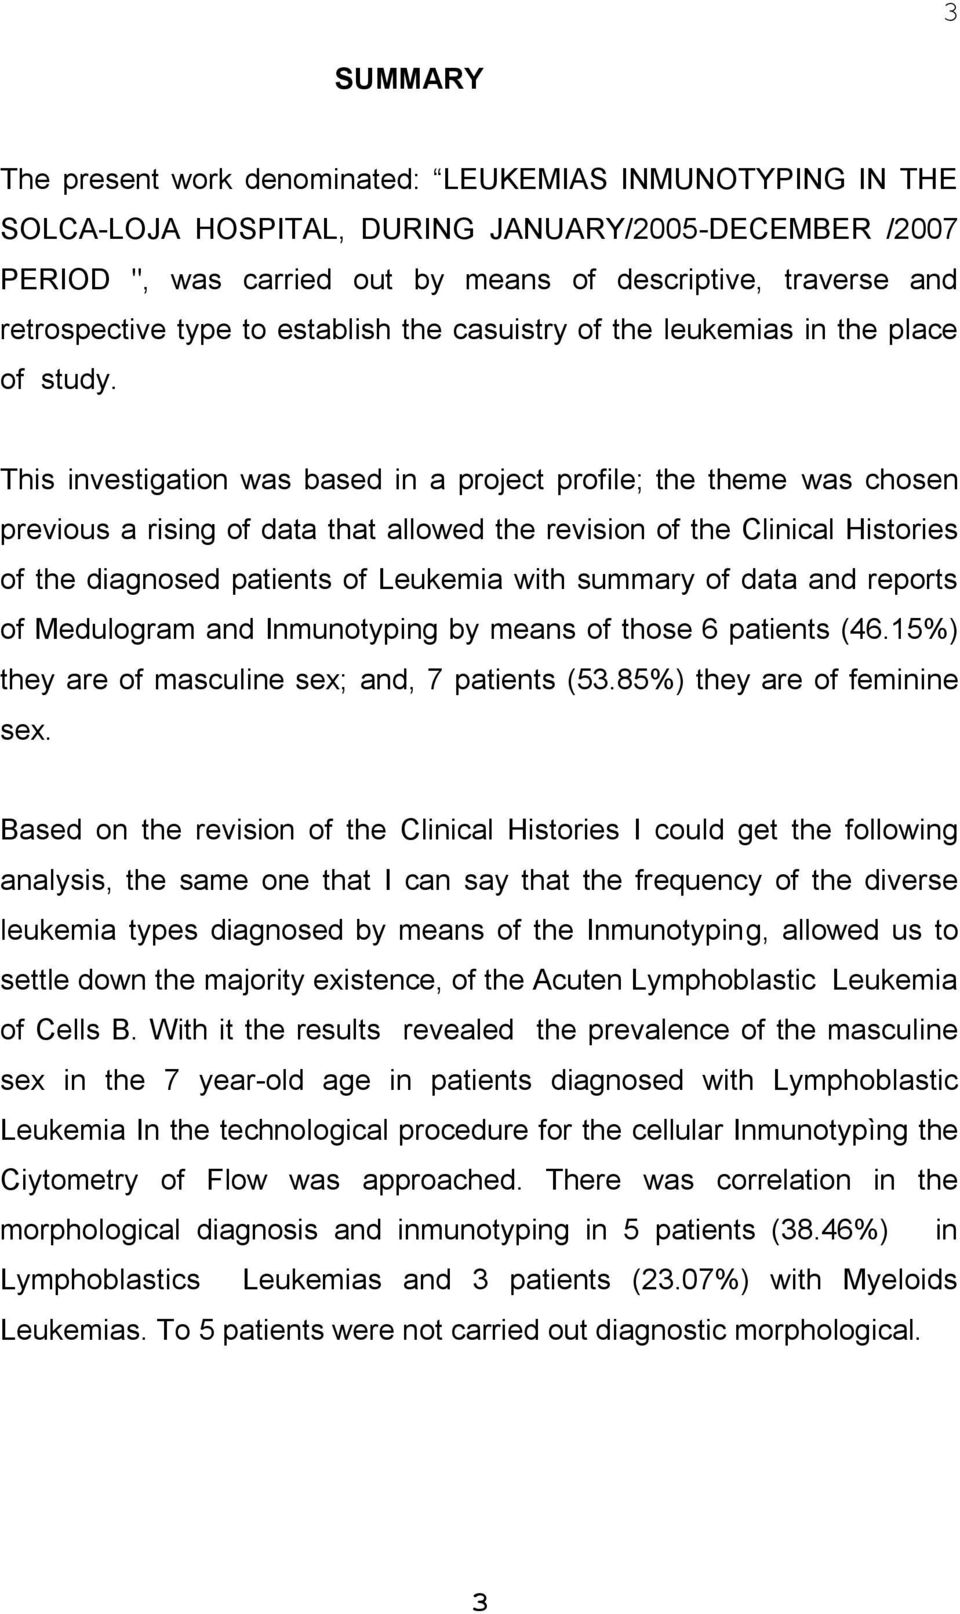 This investigation was based in a project profile; the theme was chosen previous a rising of data that allowed the revision of the Clinical Histories of the diagnosed patients of Leukemia with